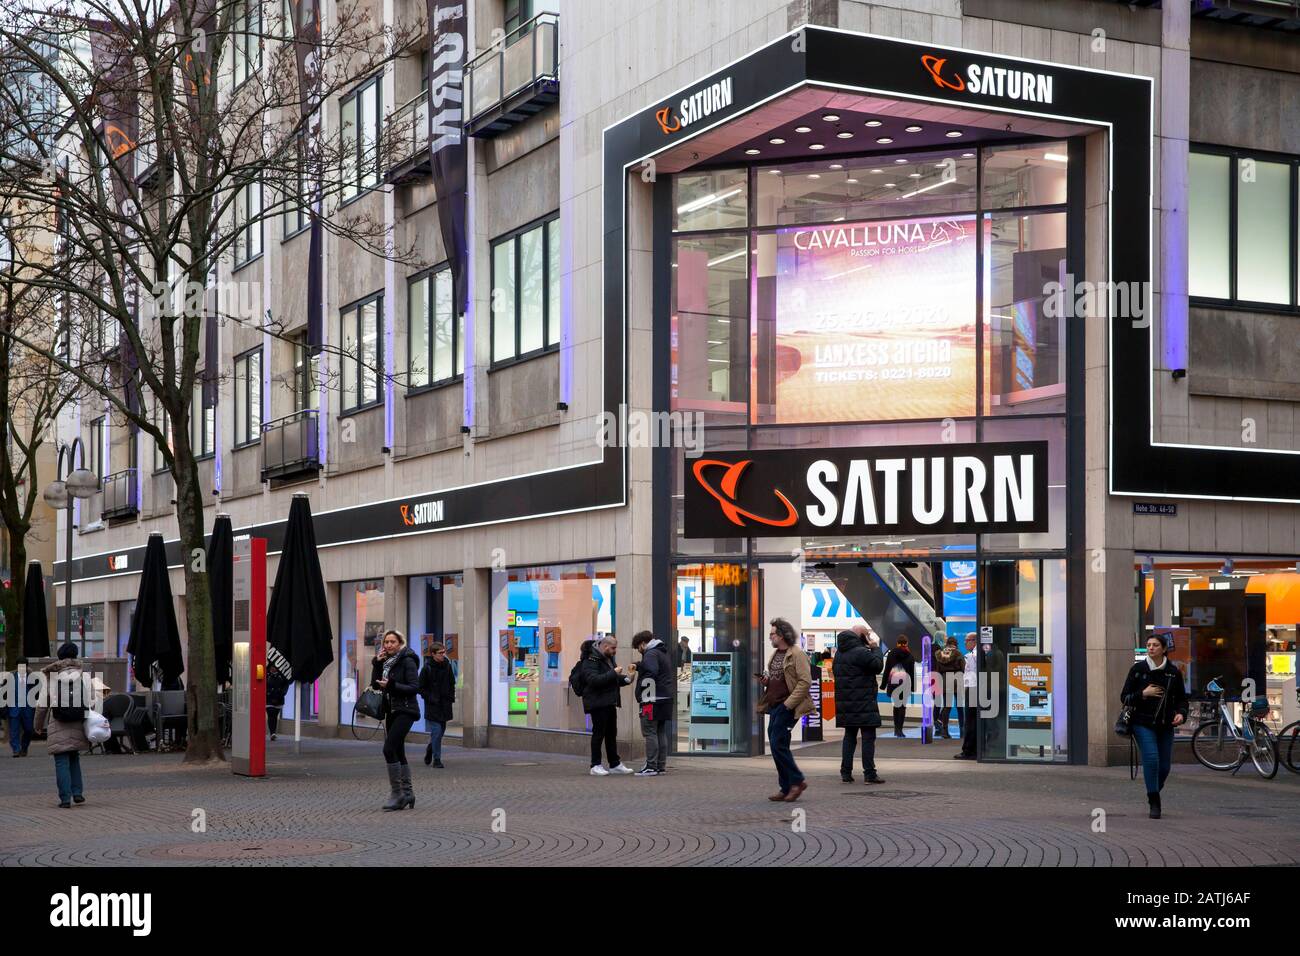 Page 2 - Saturn Store High Resolution Stock Photography and Images - Alamy